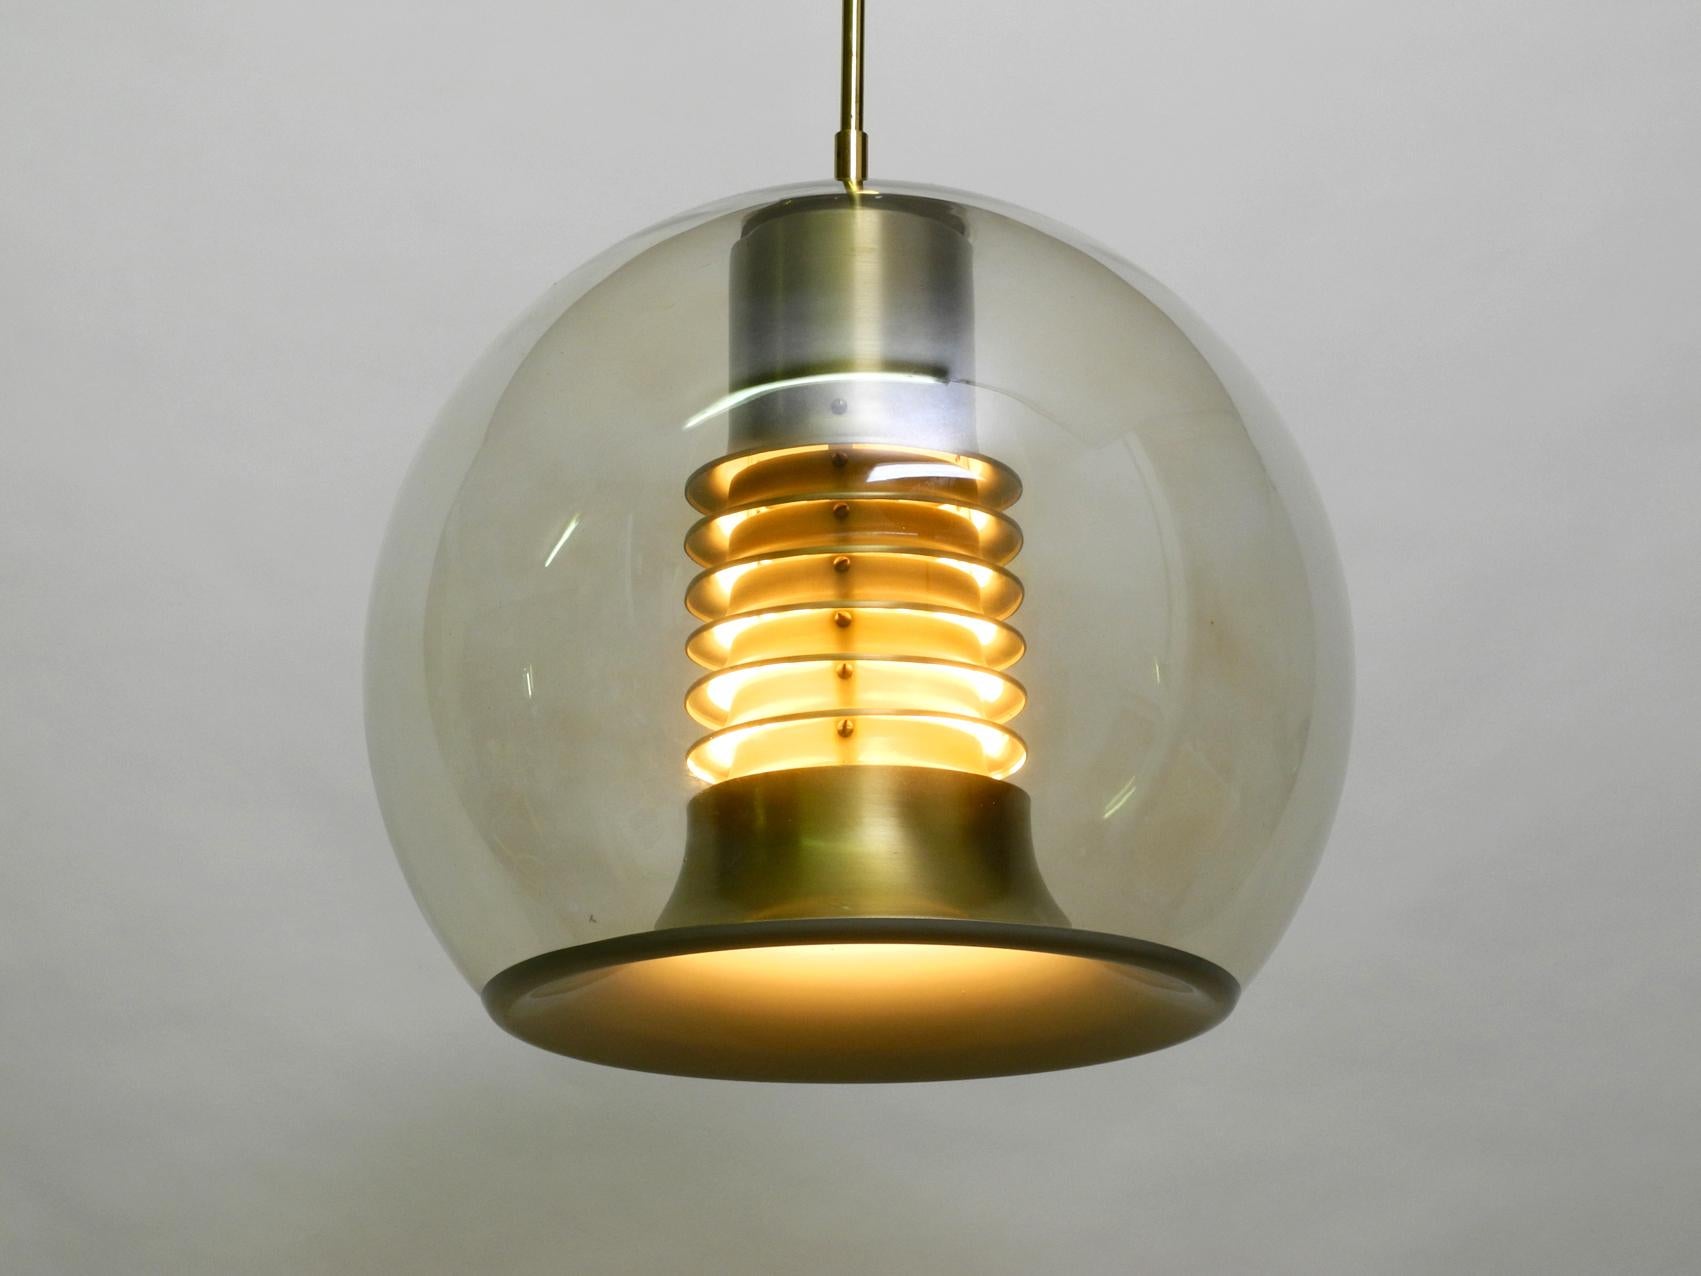 Very rare 1960s large glass globe Space Age ceiling lamp by Erco. Great space design for pleasant glare-free light downwards and to the sides. Shade is made of thick glass in light brass color. The frame inside is made of brass anodised